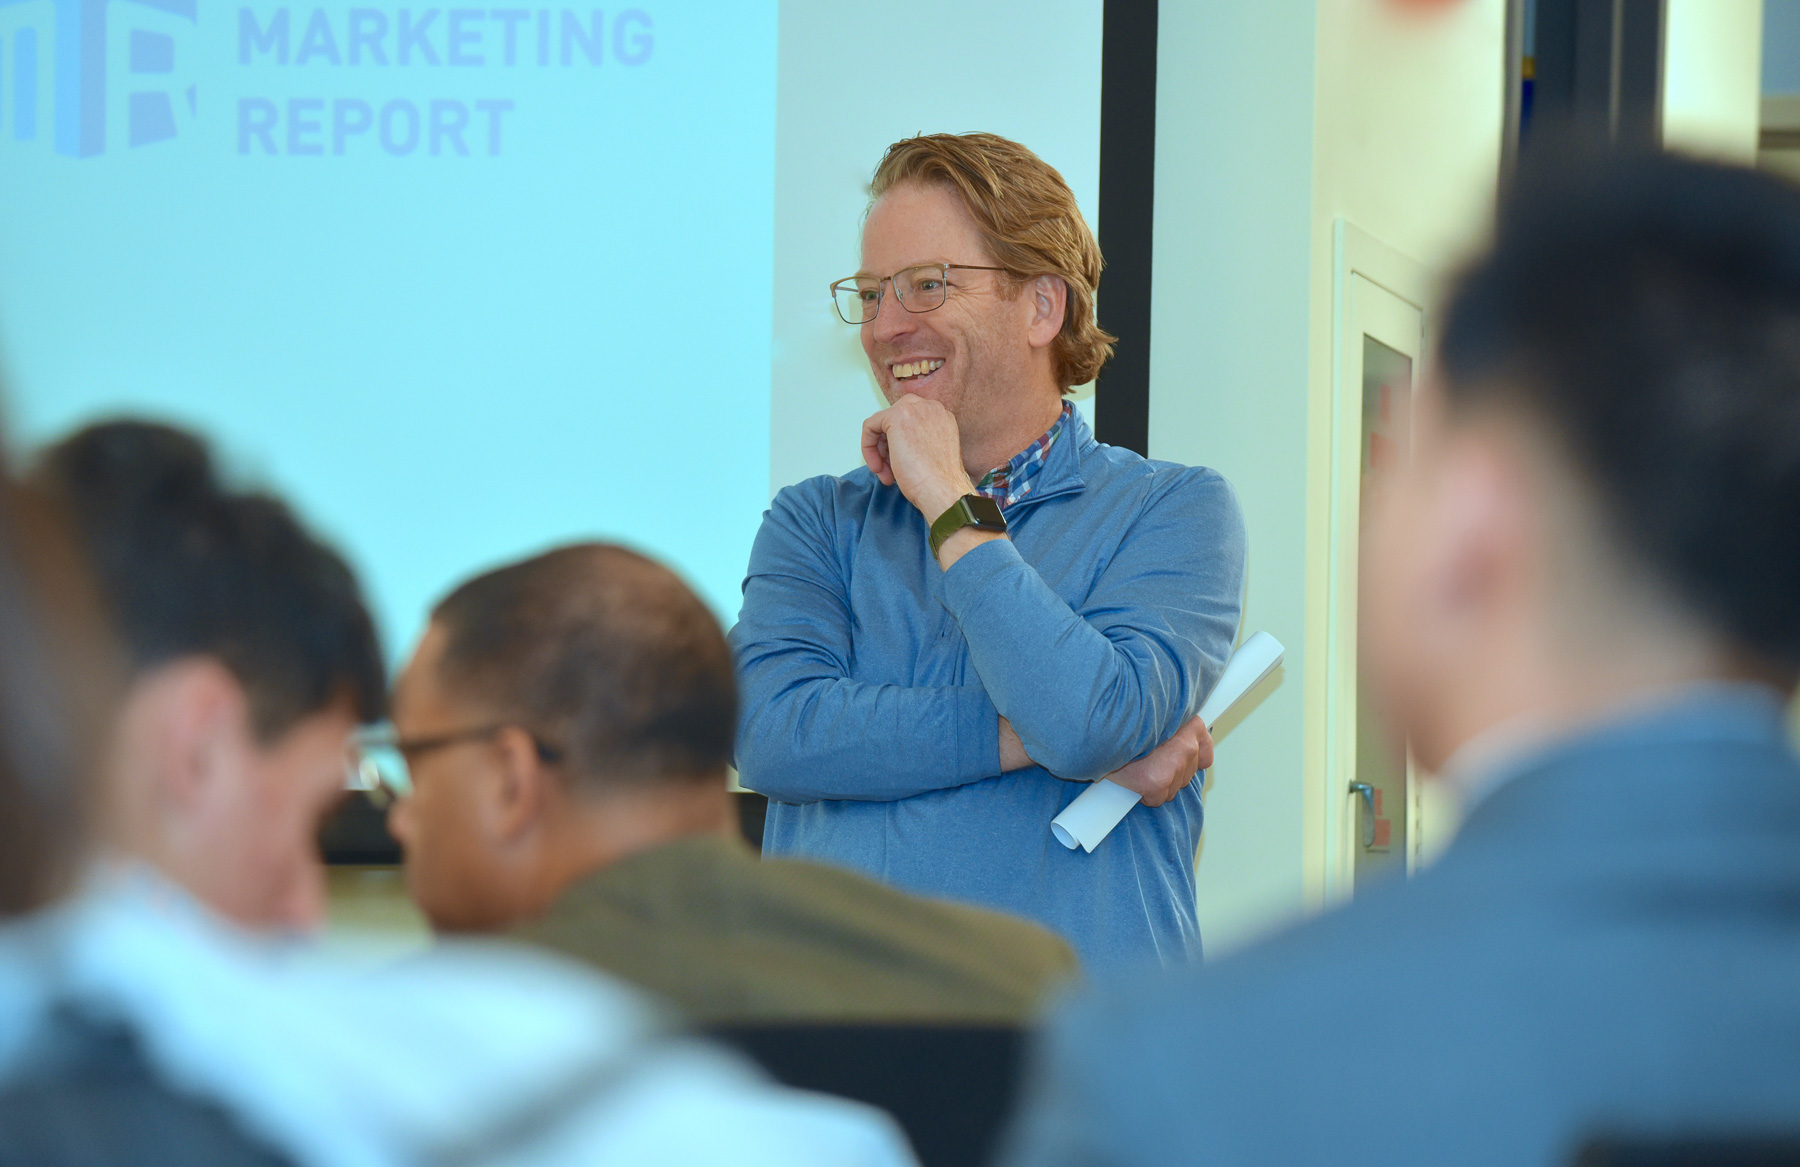 Kicking off on Monday, Nov. 28, Chris Hartweg, publisher and CEO for Team Marketing Report, lead a discussion with the class on DePaul’s Loop Campus.